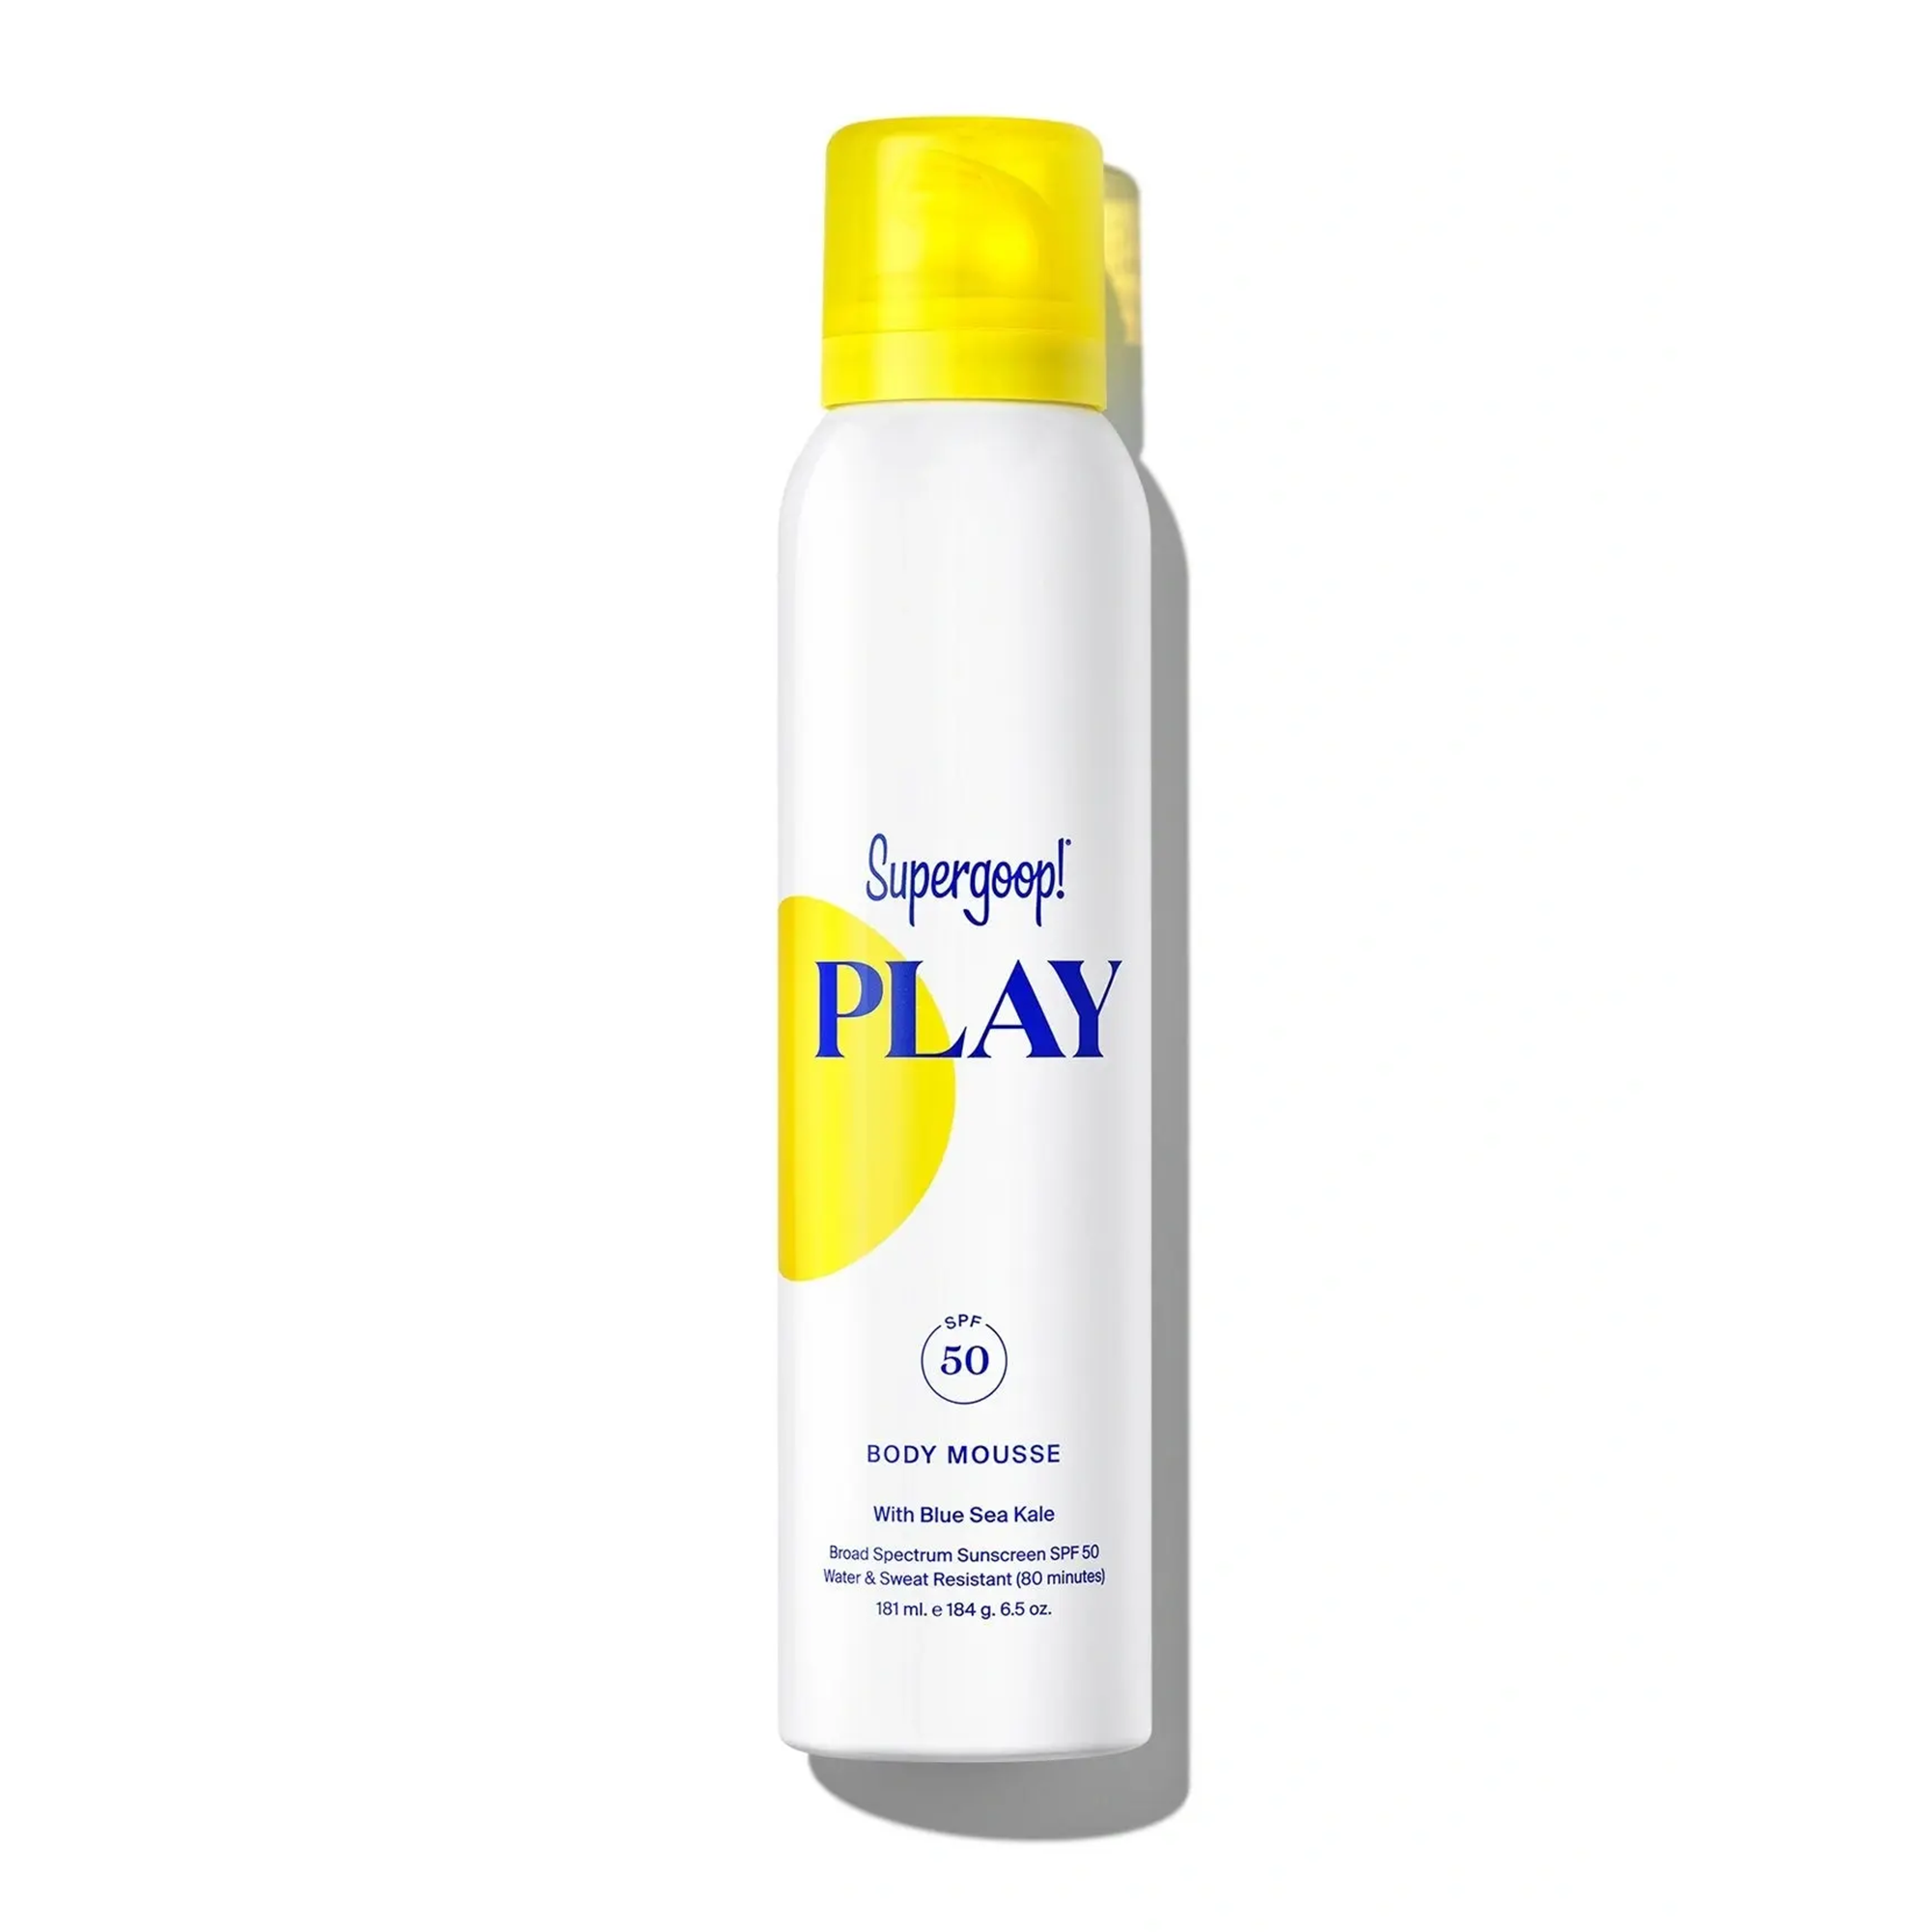 Supergoop! PLAY Body Mousse SPF 50 with Blue Sea Kale / 6.5OZ